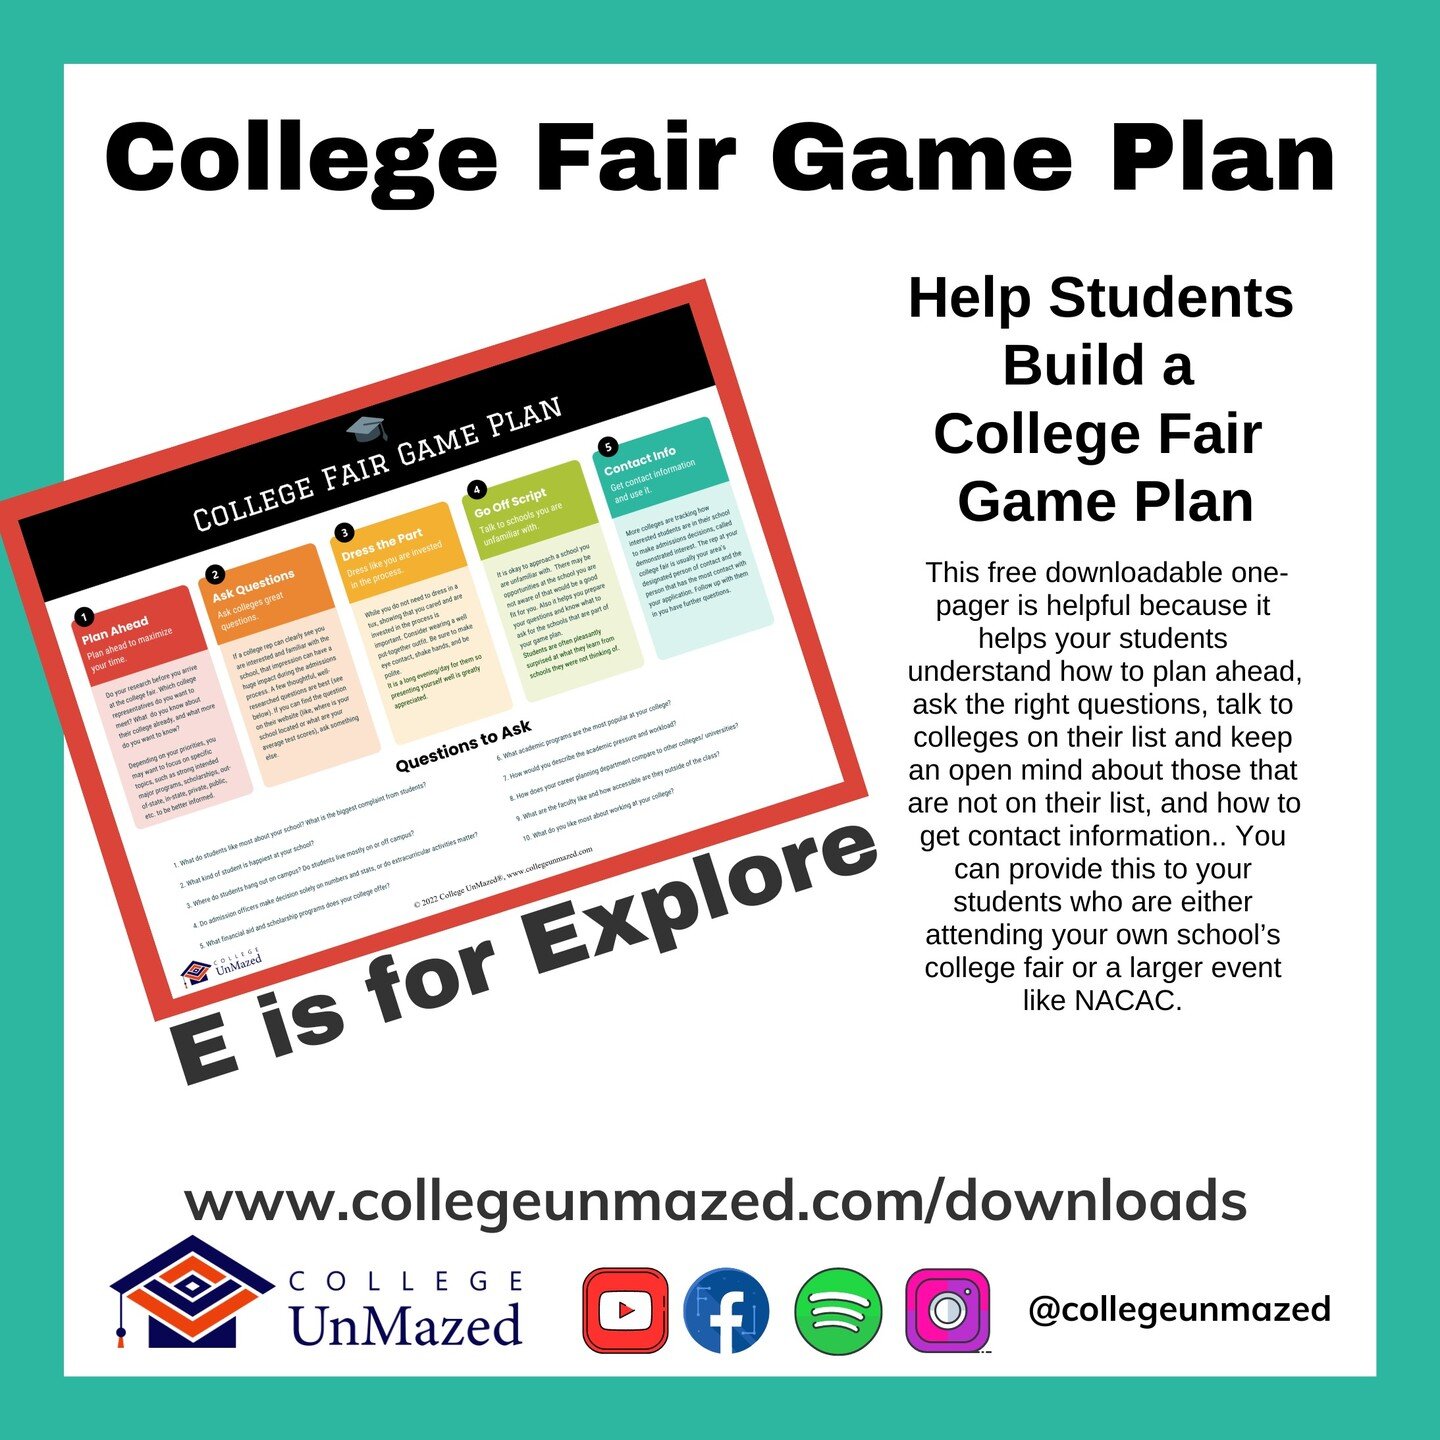 It's time for many families to start exploring their options for college. One of the best ways to get a lot of bang-for-your-buck is by attending a college fair. To help your students prepare for the event, this free downloadable College Fair Game Pl